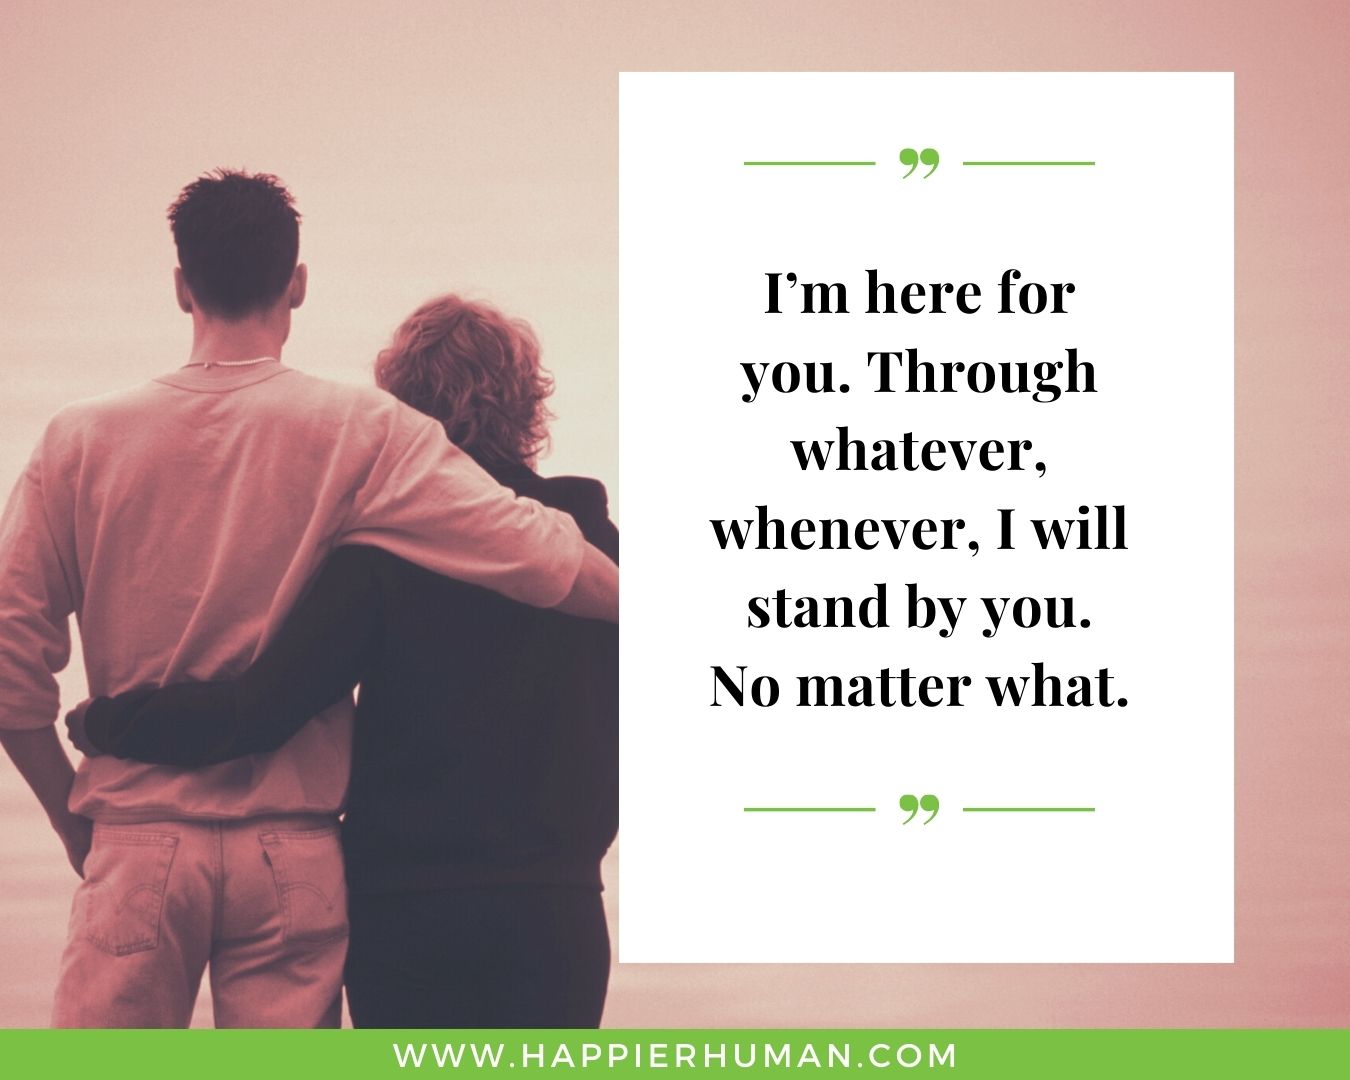 I’m Here for You Quotes - “I’m here for you. Through whatever, whenever, I will stand by you. No matter what.”